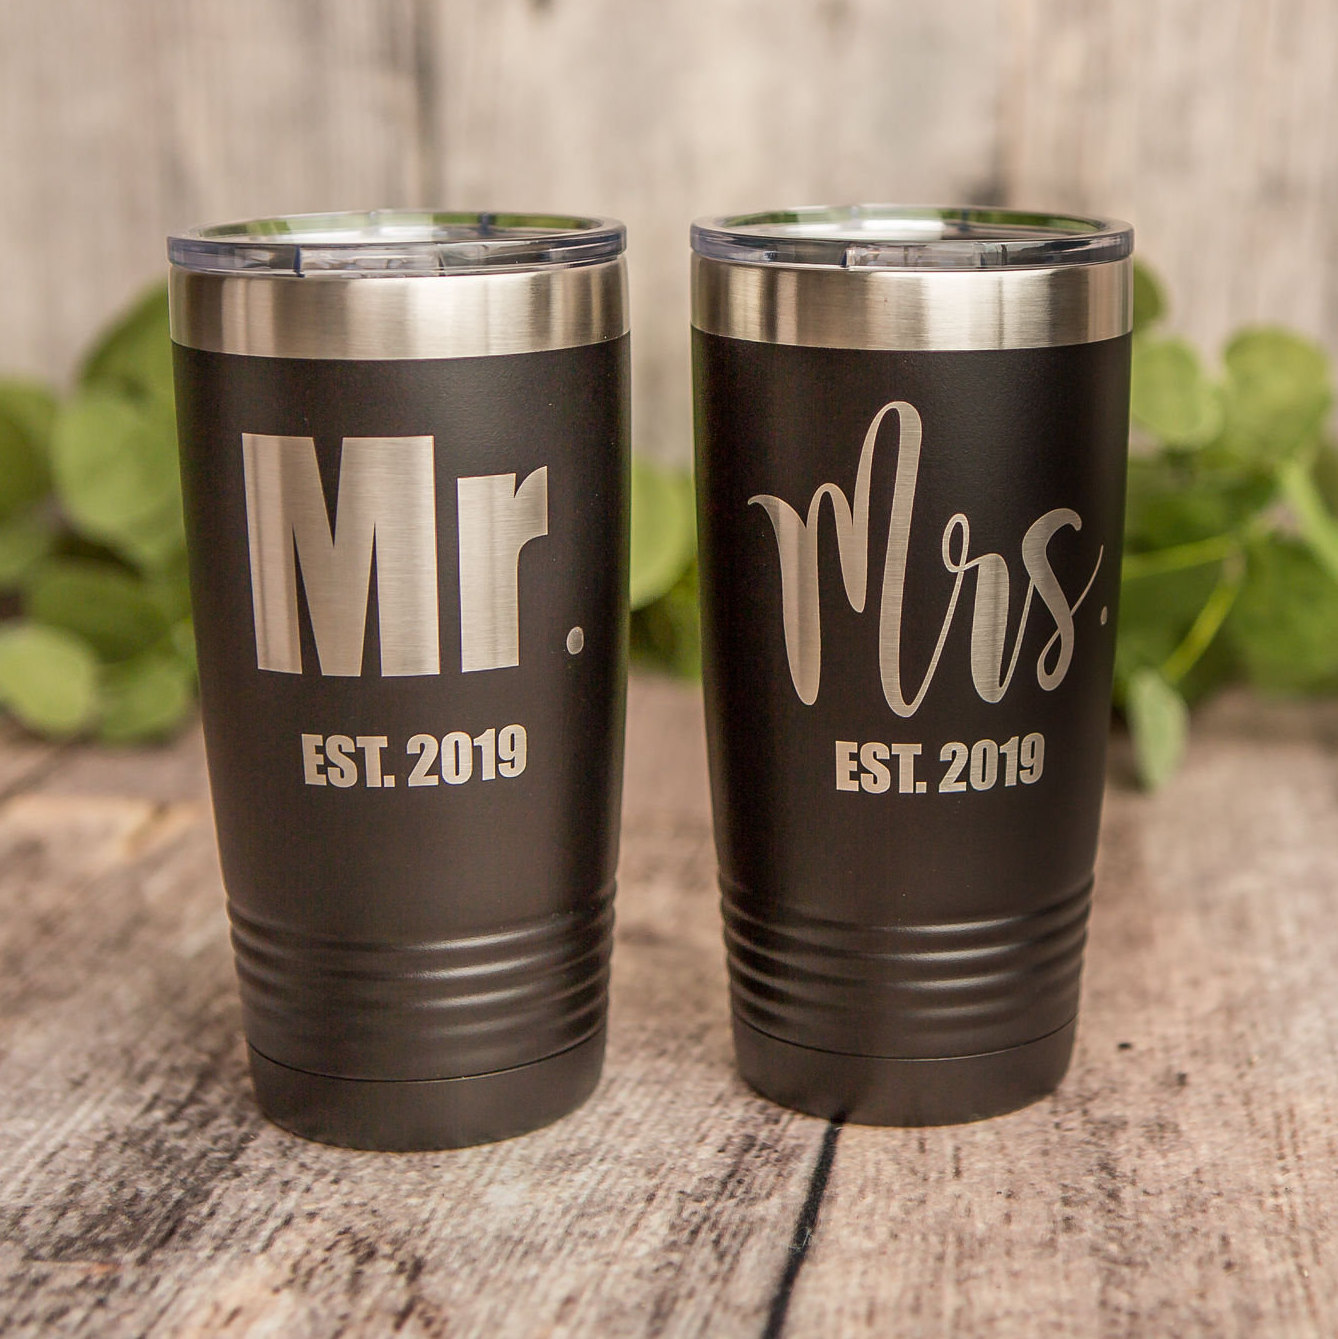 https://3cetching.com/wp-content/uploads/2020/09/mr-and-mrs-established-2019-tumbler-set-engraved-stainless-steel-tumbler-yeti-style-cup-wedding-gift-5f5fc5f8.jpg